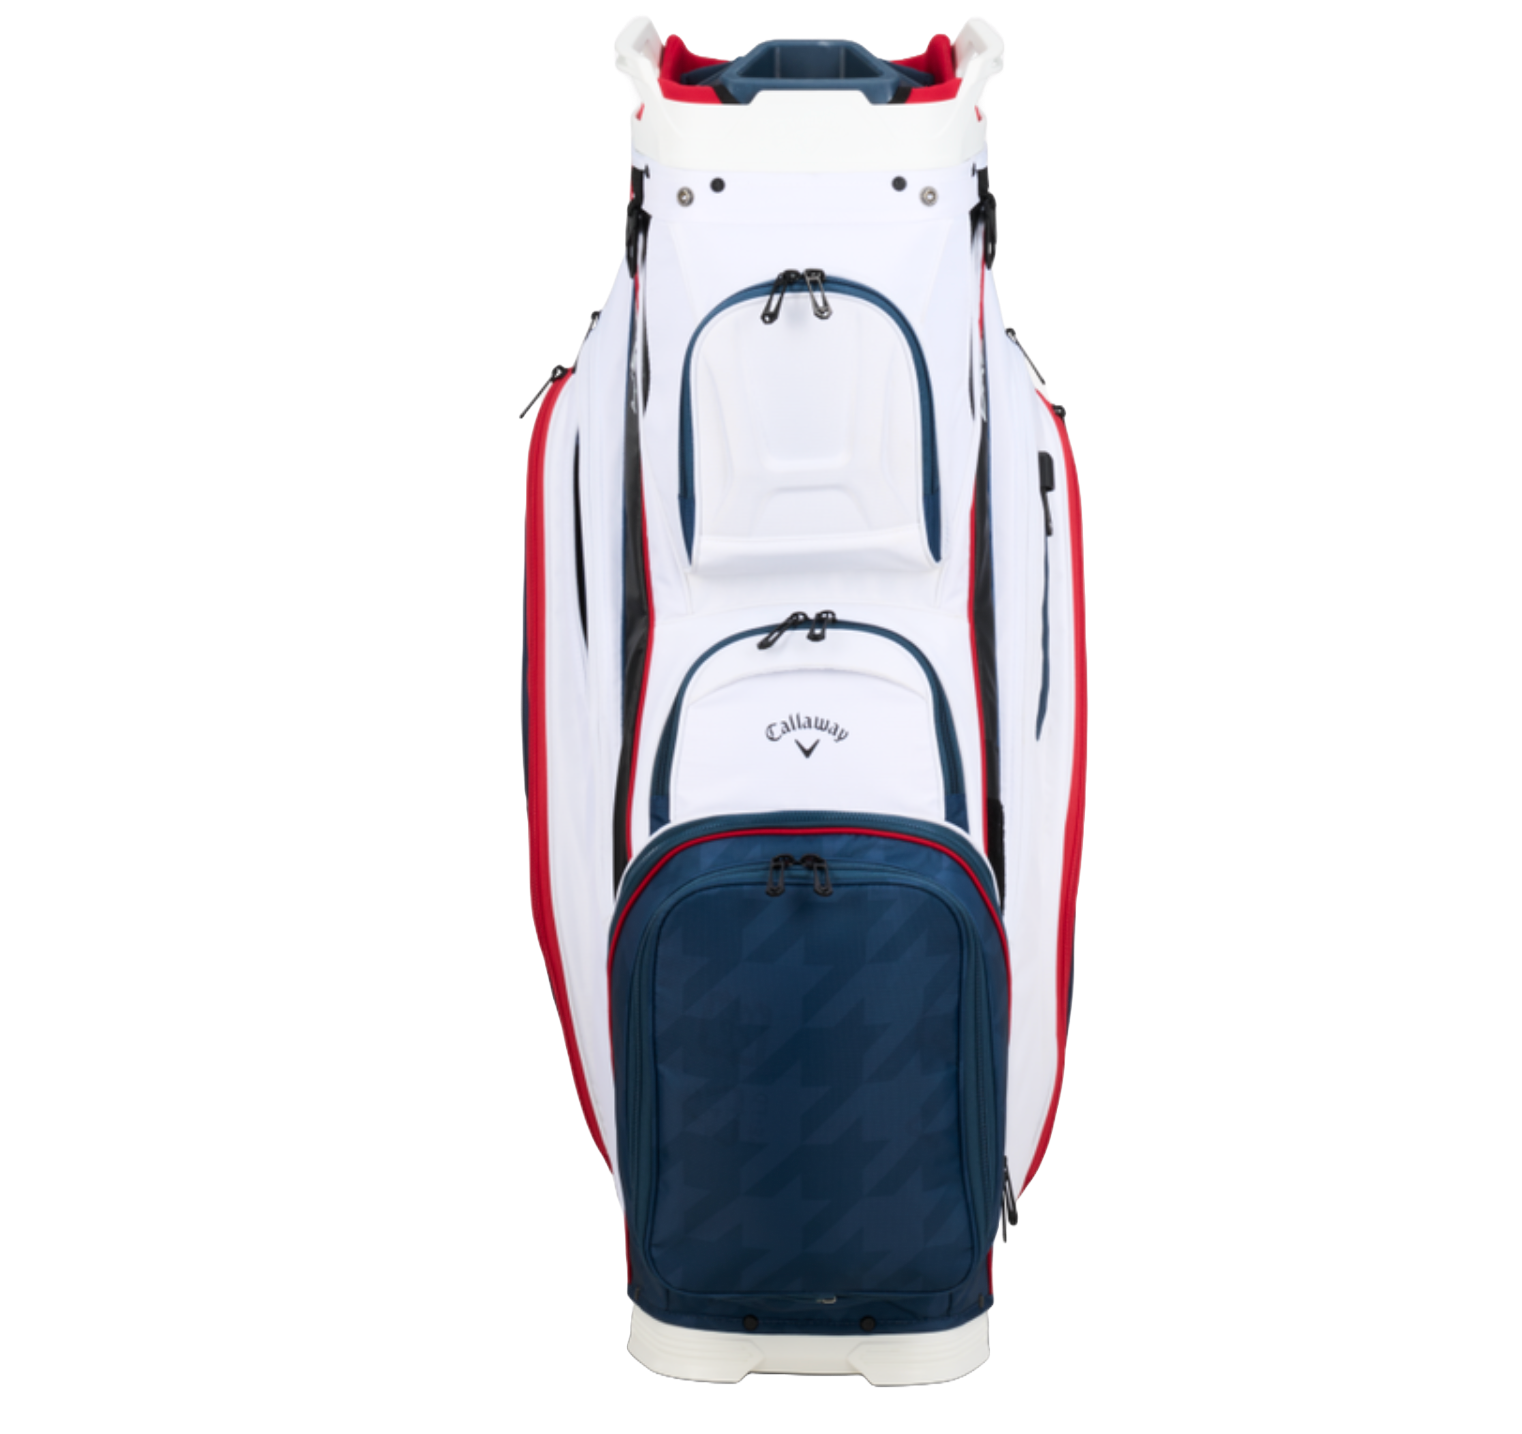 Callaway | 5124093 | Org 14 | Cartbag  | White / Navy Hounds / Red